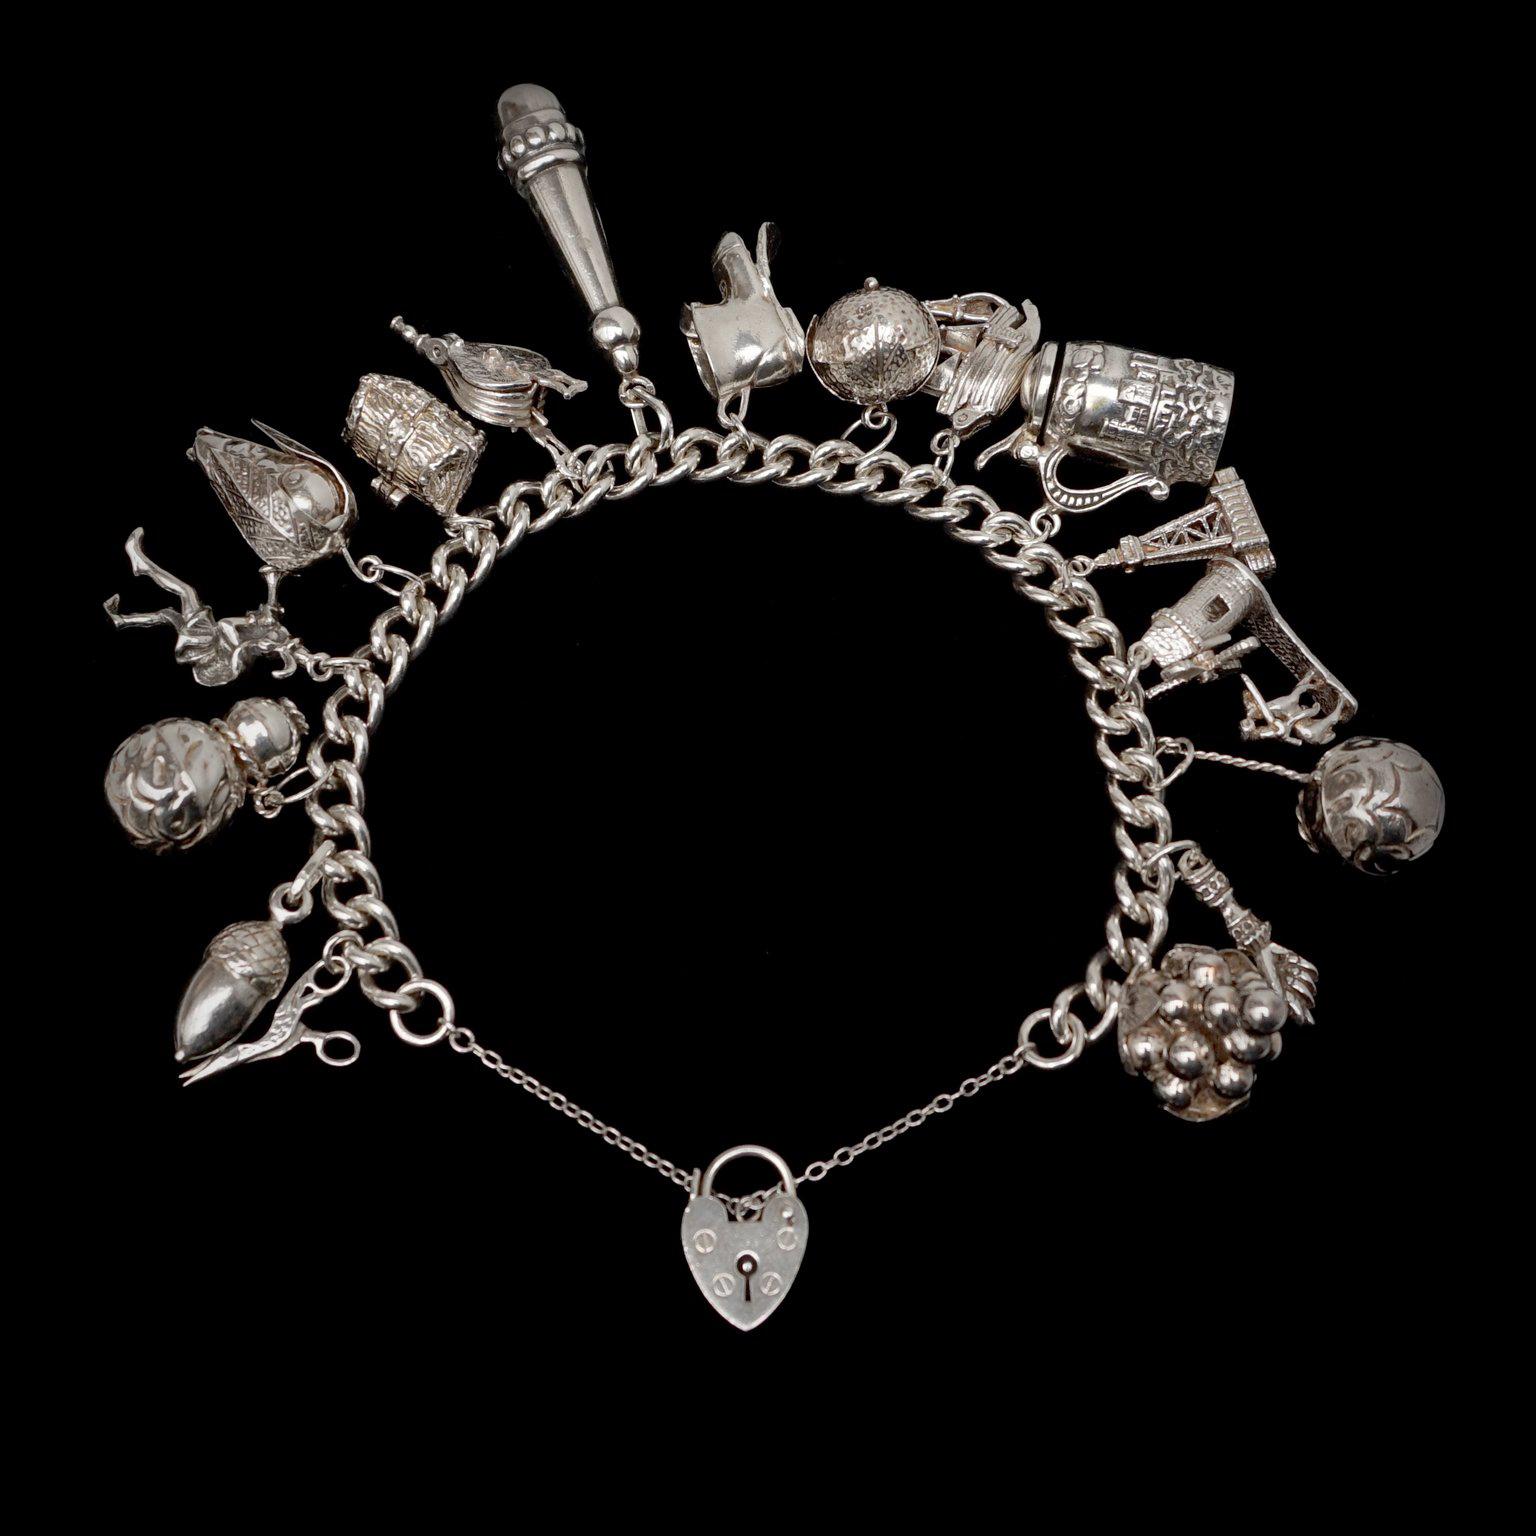 This English 1950s heavy sterling silver bracelet has 17 large three-dimensional charms and opens or closes with a heart shaped padlock on a little safety chain.

Some of the charms have moving or opening parts. 
The windmill really turns, the